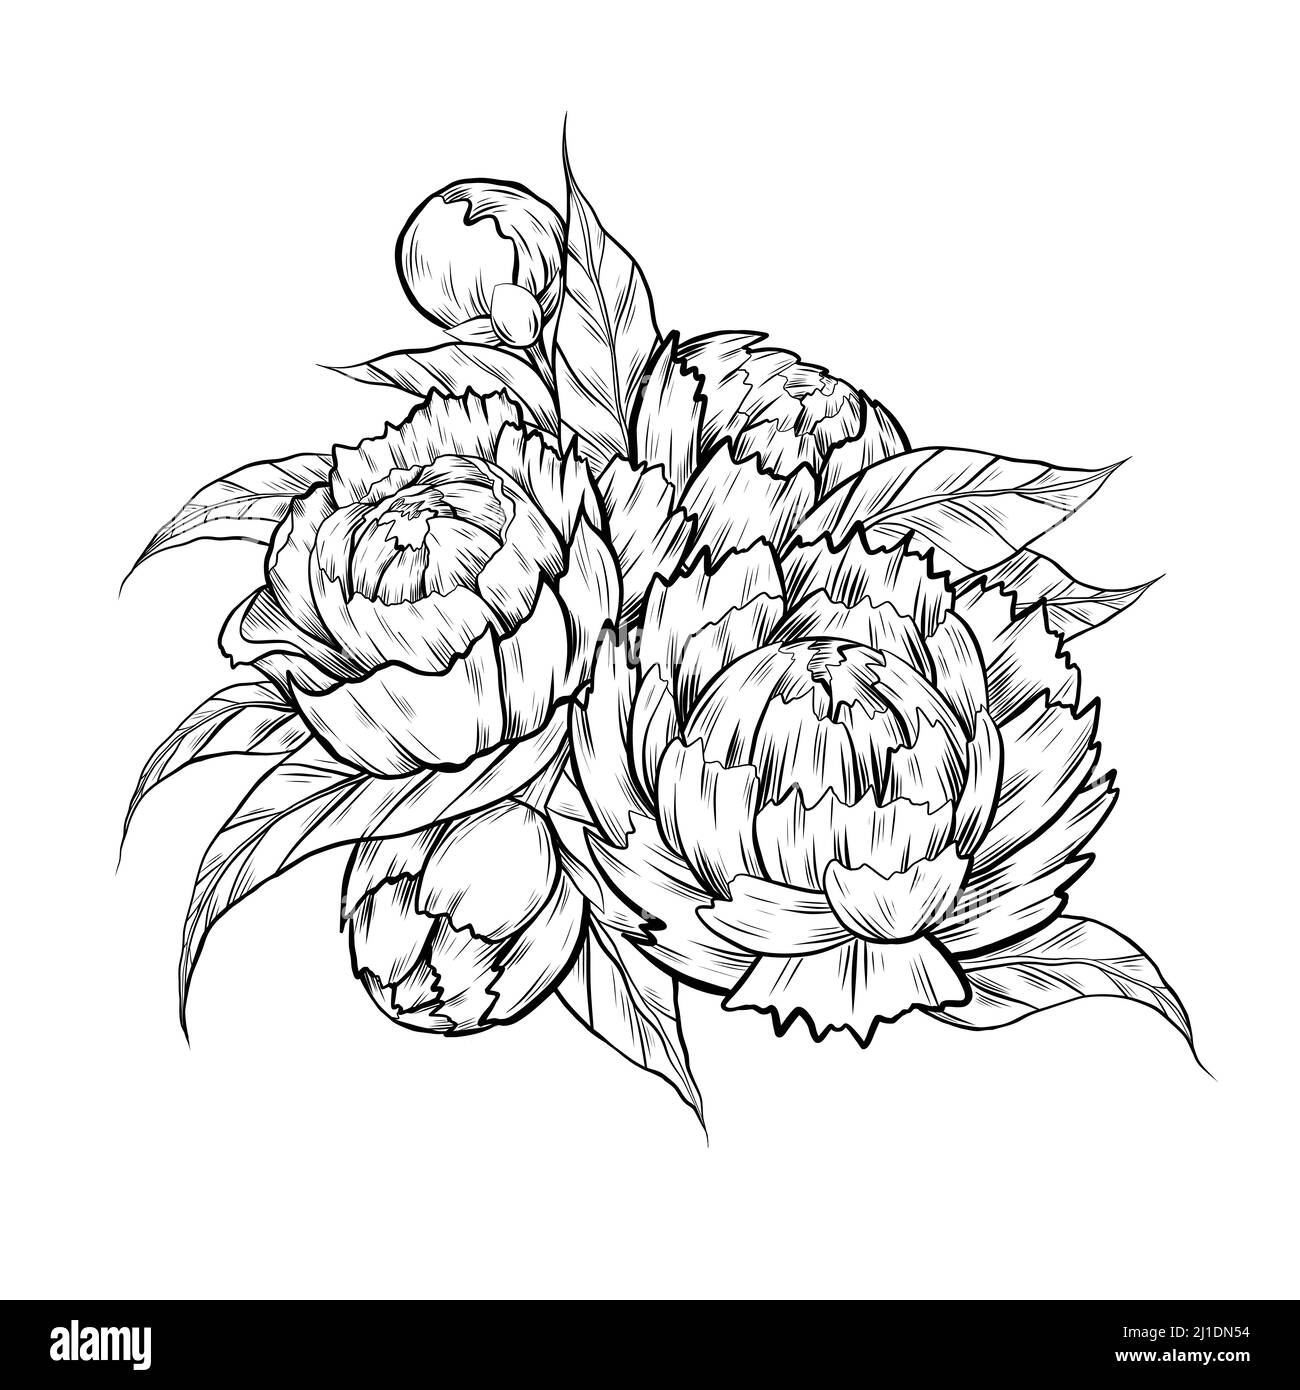 Vector monochrome sketch illustration of peony flowers with foliage. Contour ink Image of natural floral bouquet with hatching Stock Vector